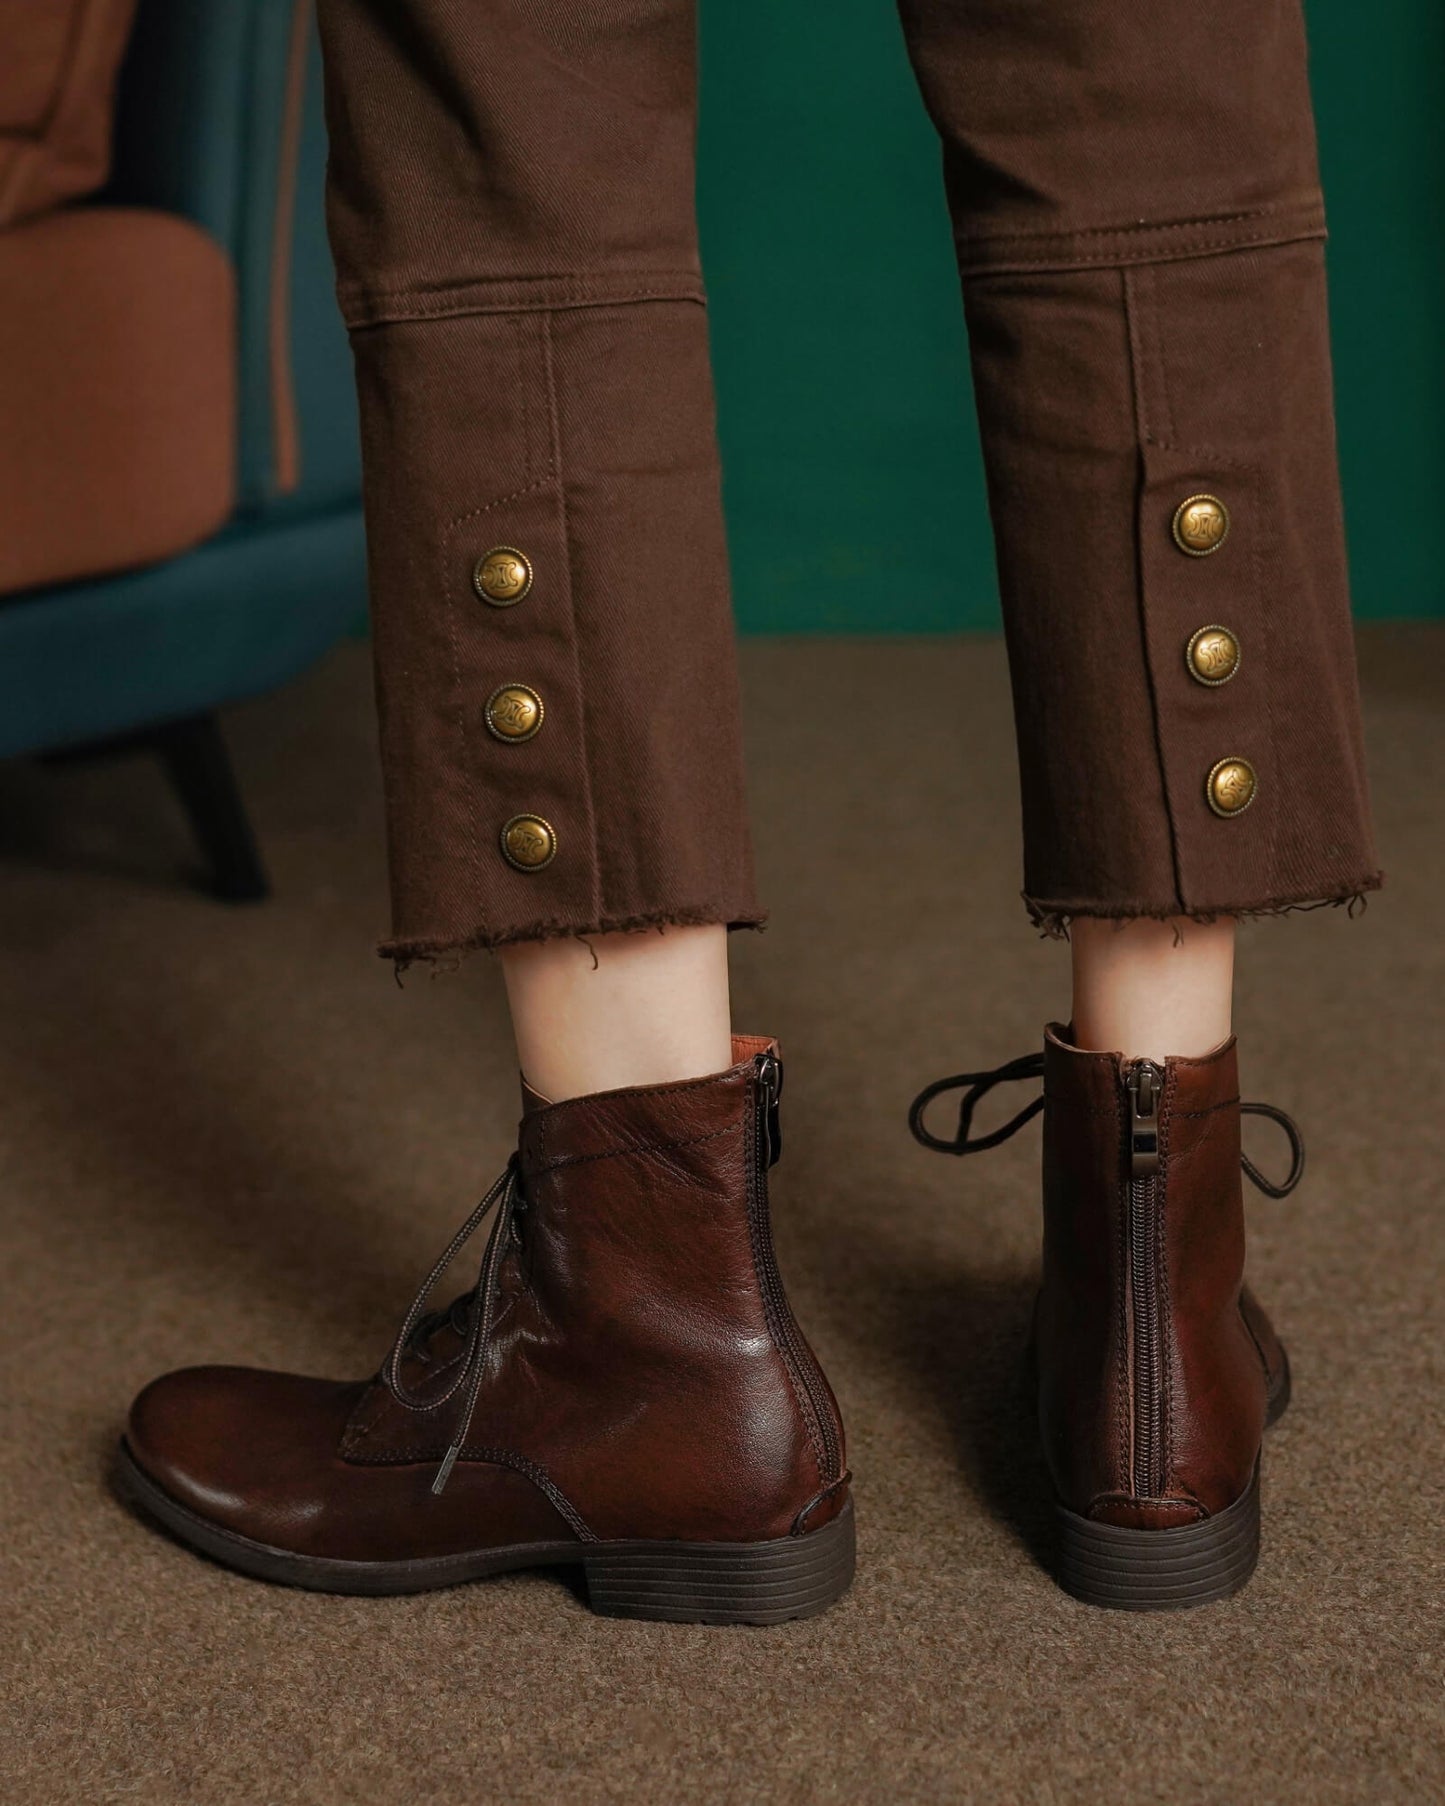 329-combat-boots-brown-leather-model-1